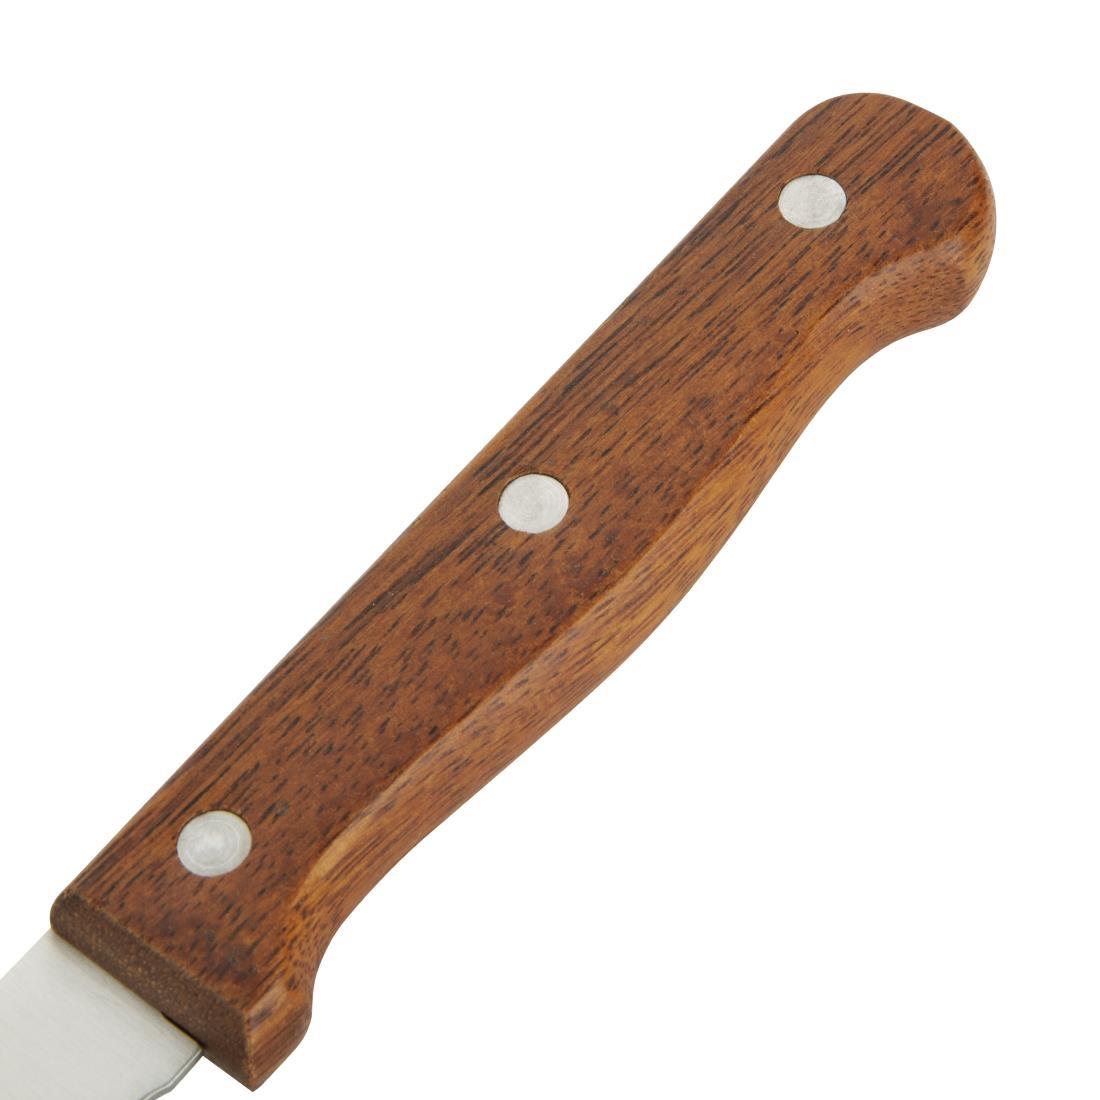 Olympia Steak Knives Wooden Handle (Pack of 12) - C136  - 5